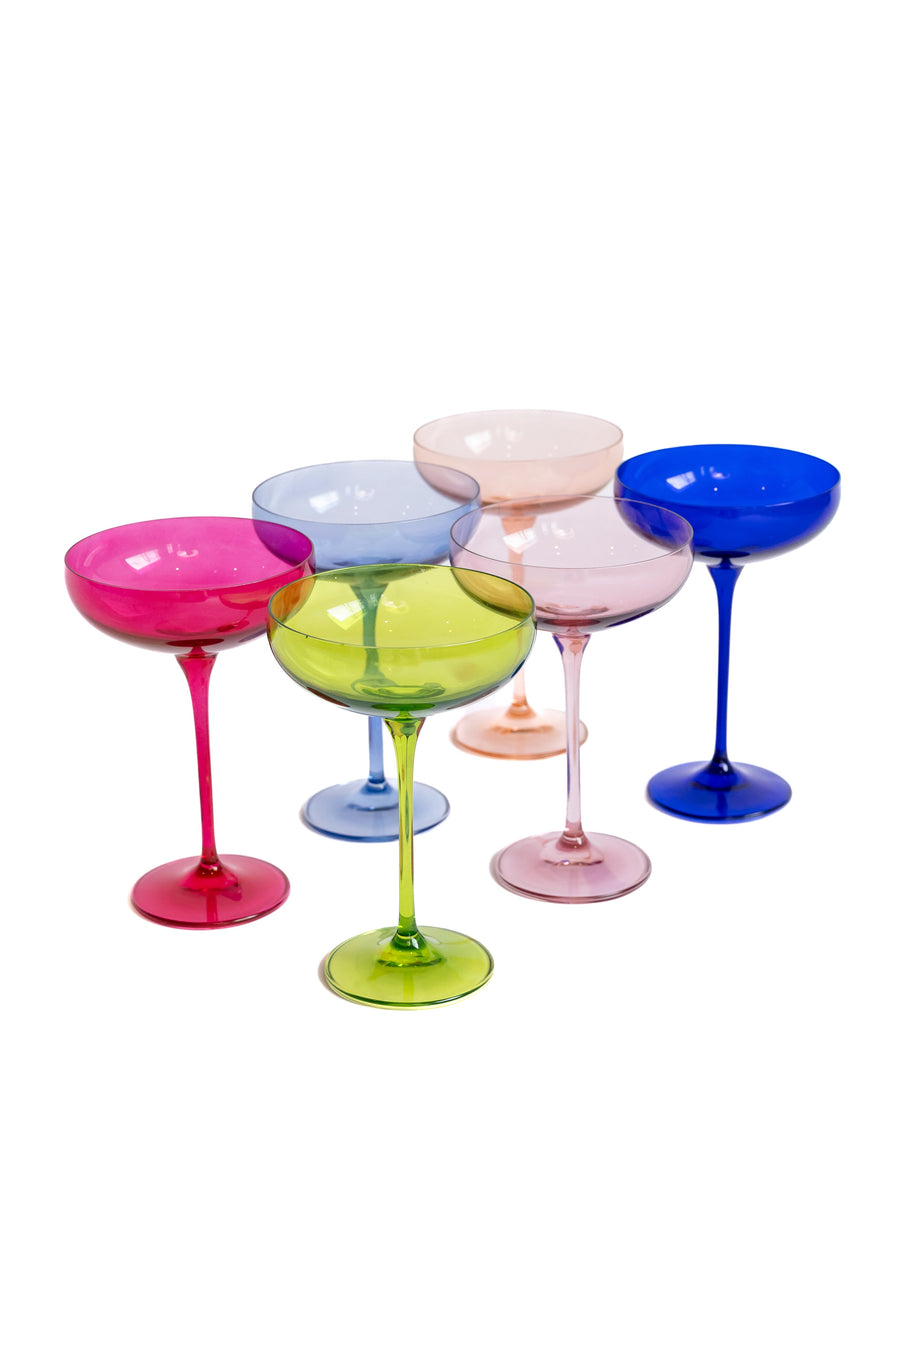 Mixed Champagne Coupe Stemware - Set of 6